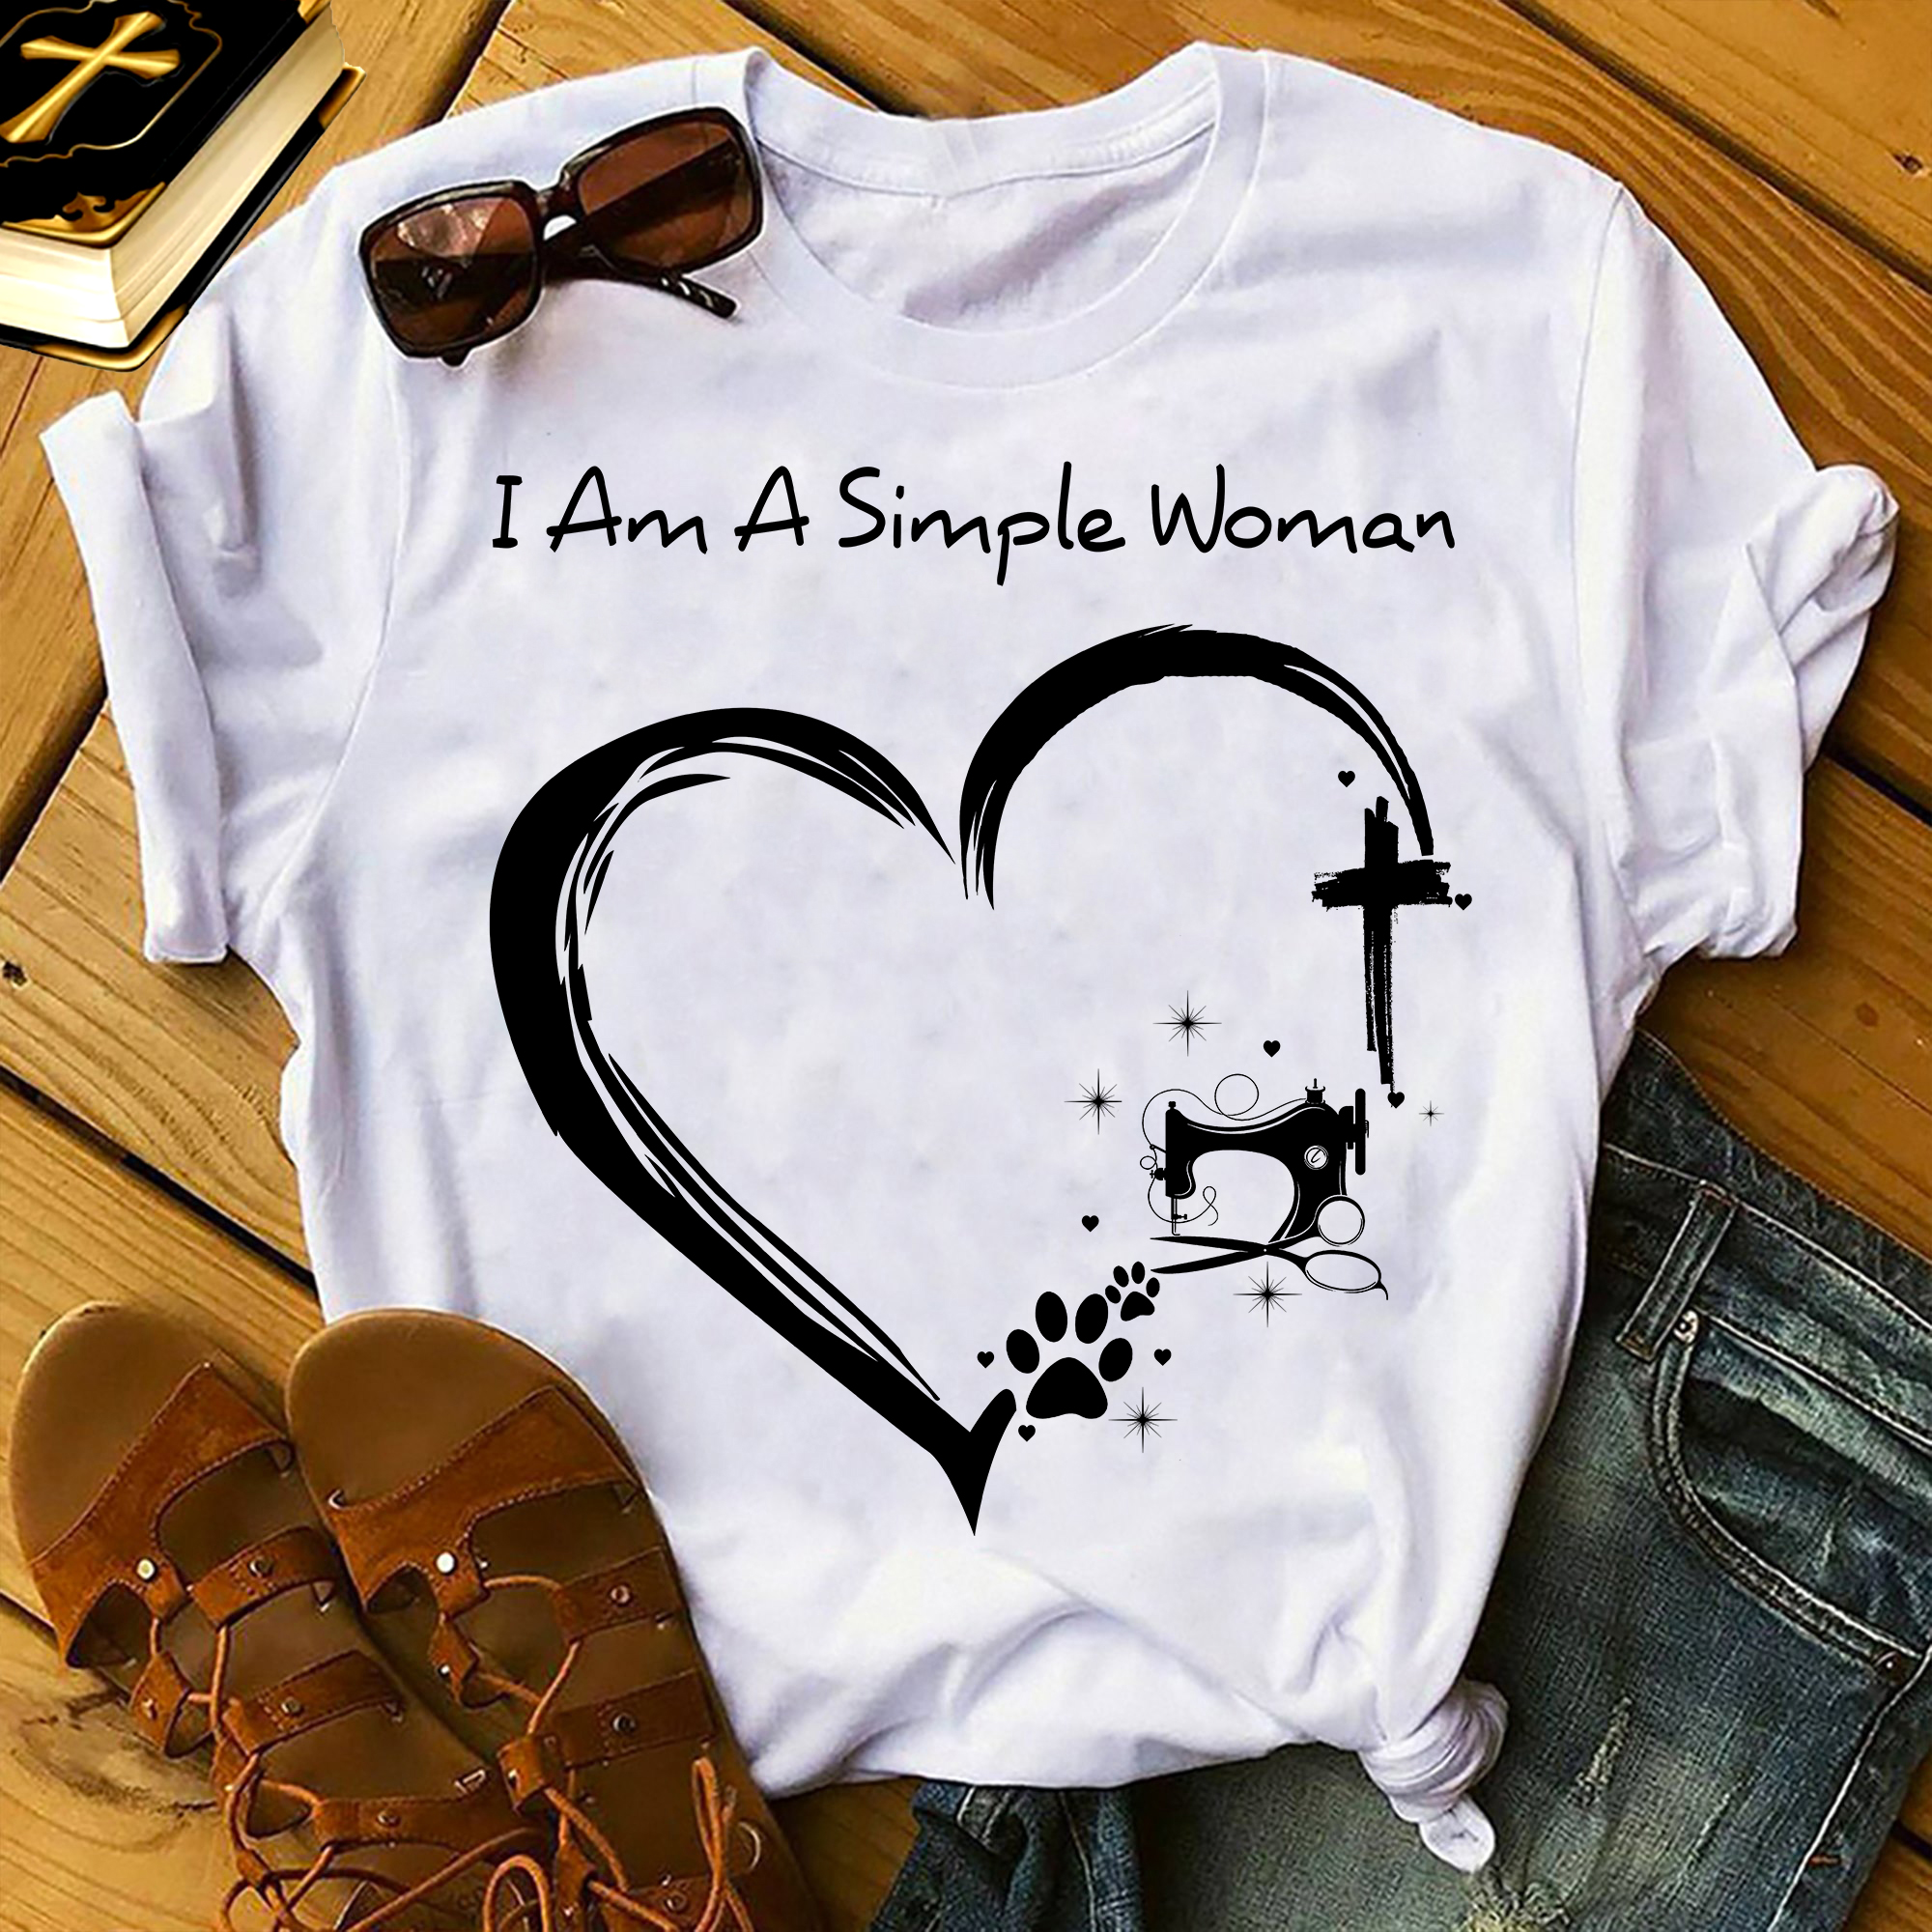 I am a simple woman - God, sewing, dog lover